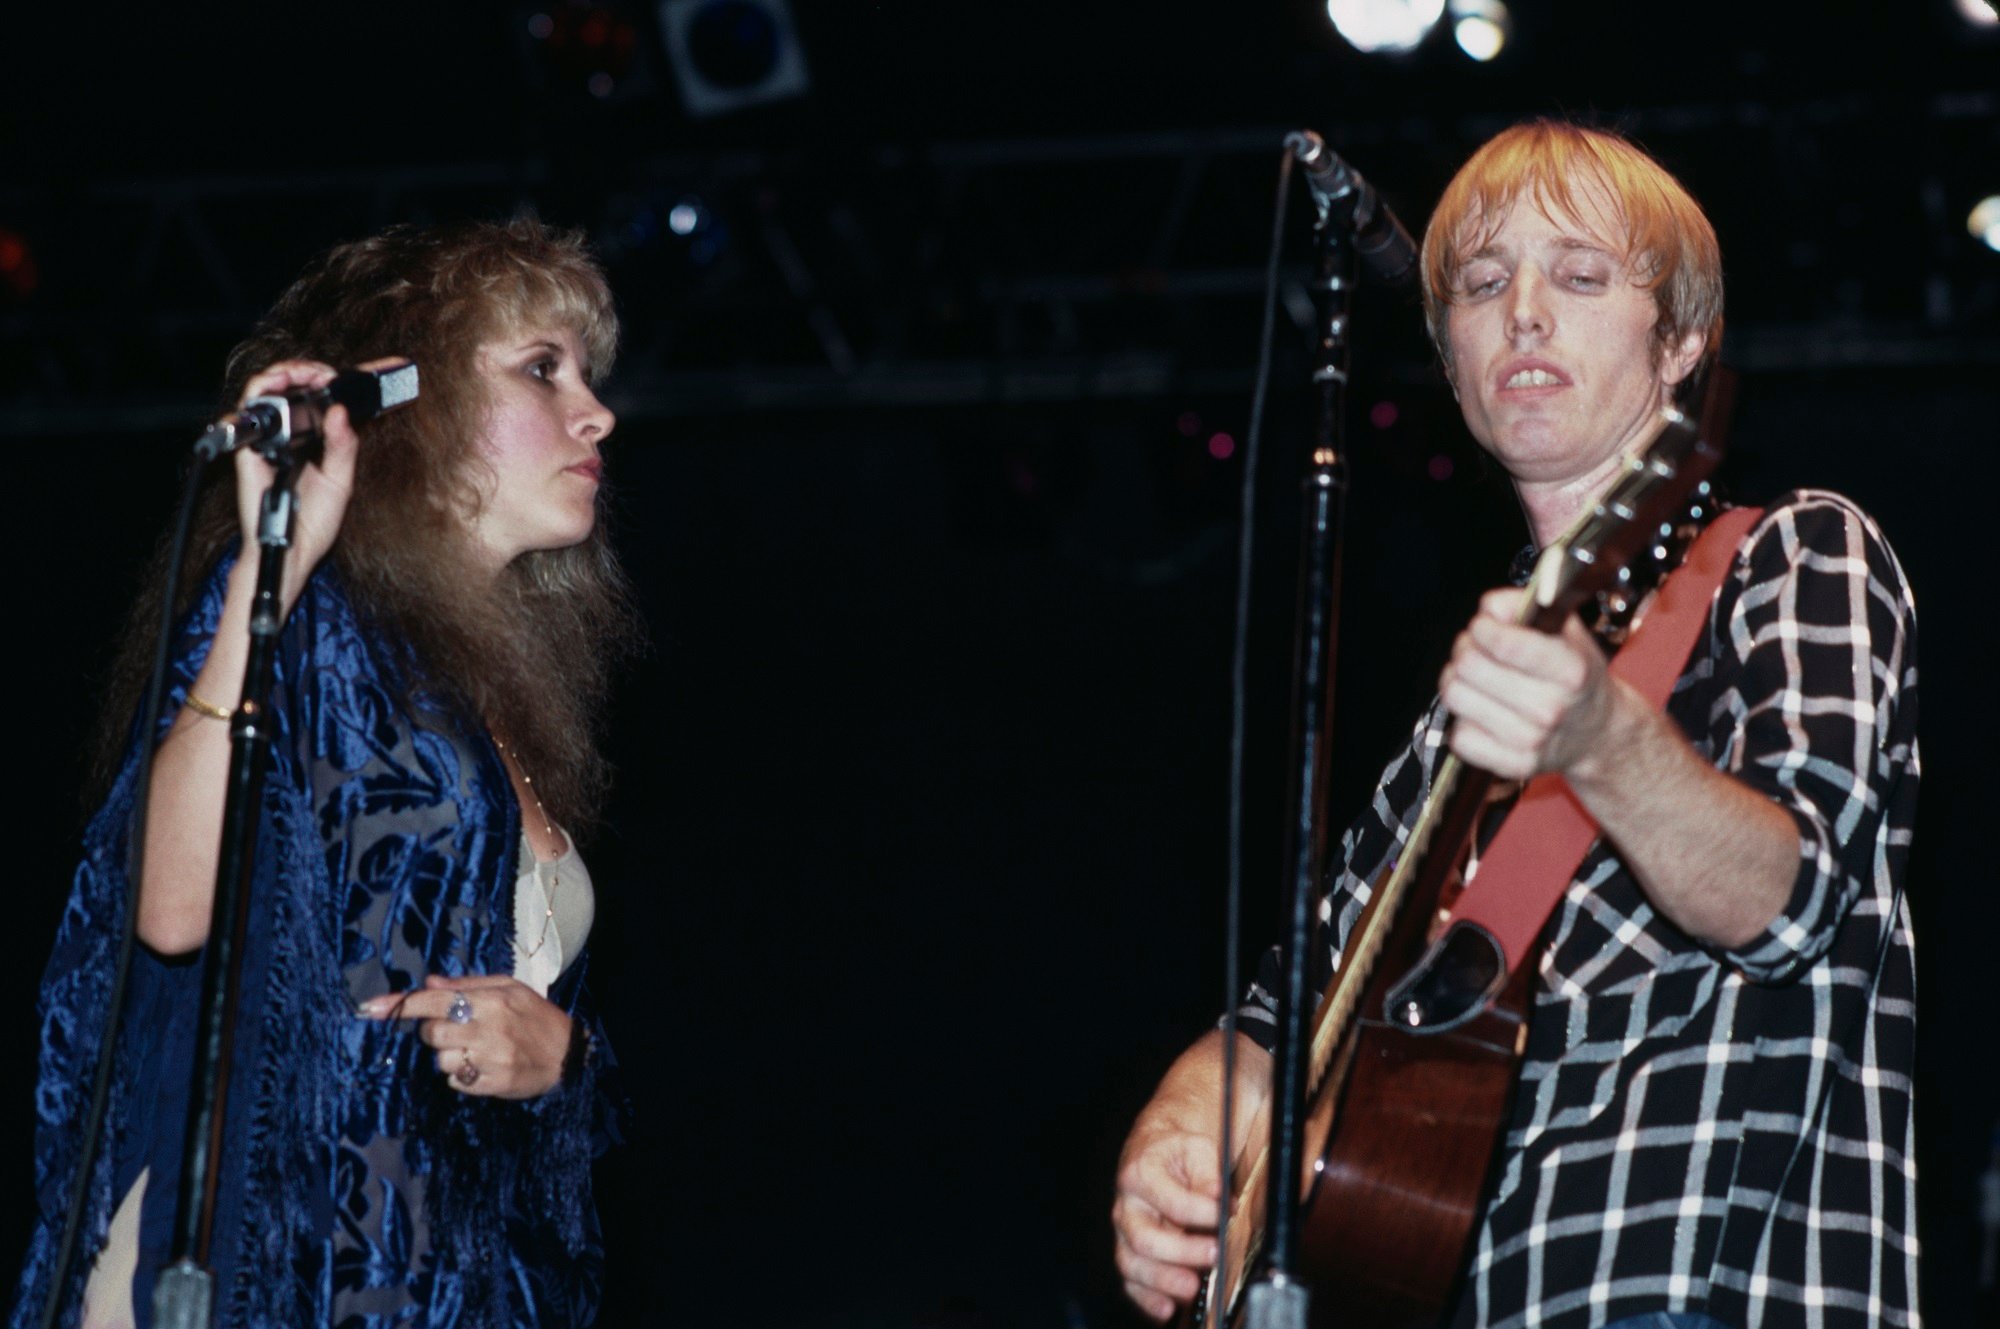 Stevie Nicks holding a microphone and Tom Petty playing guitar onstage